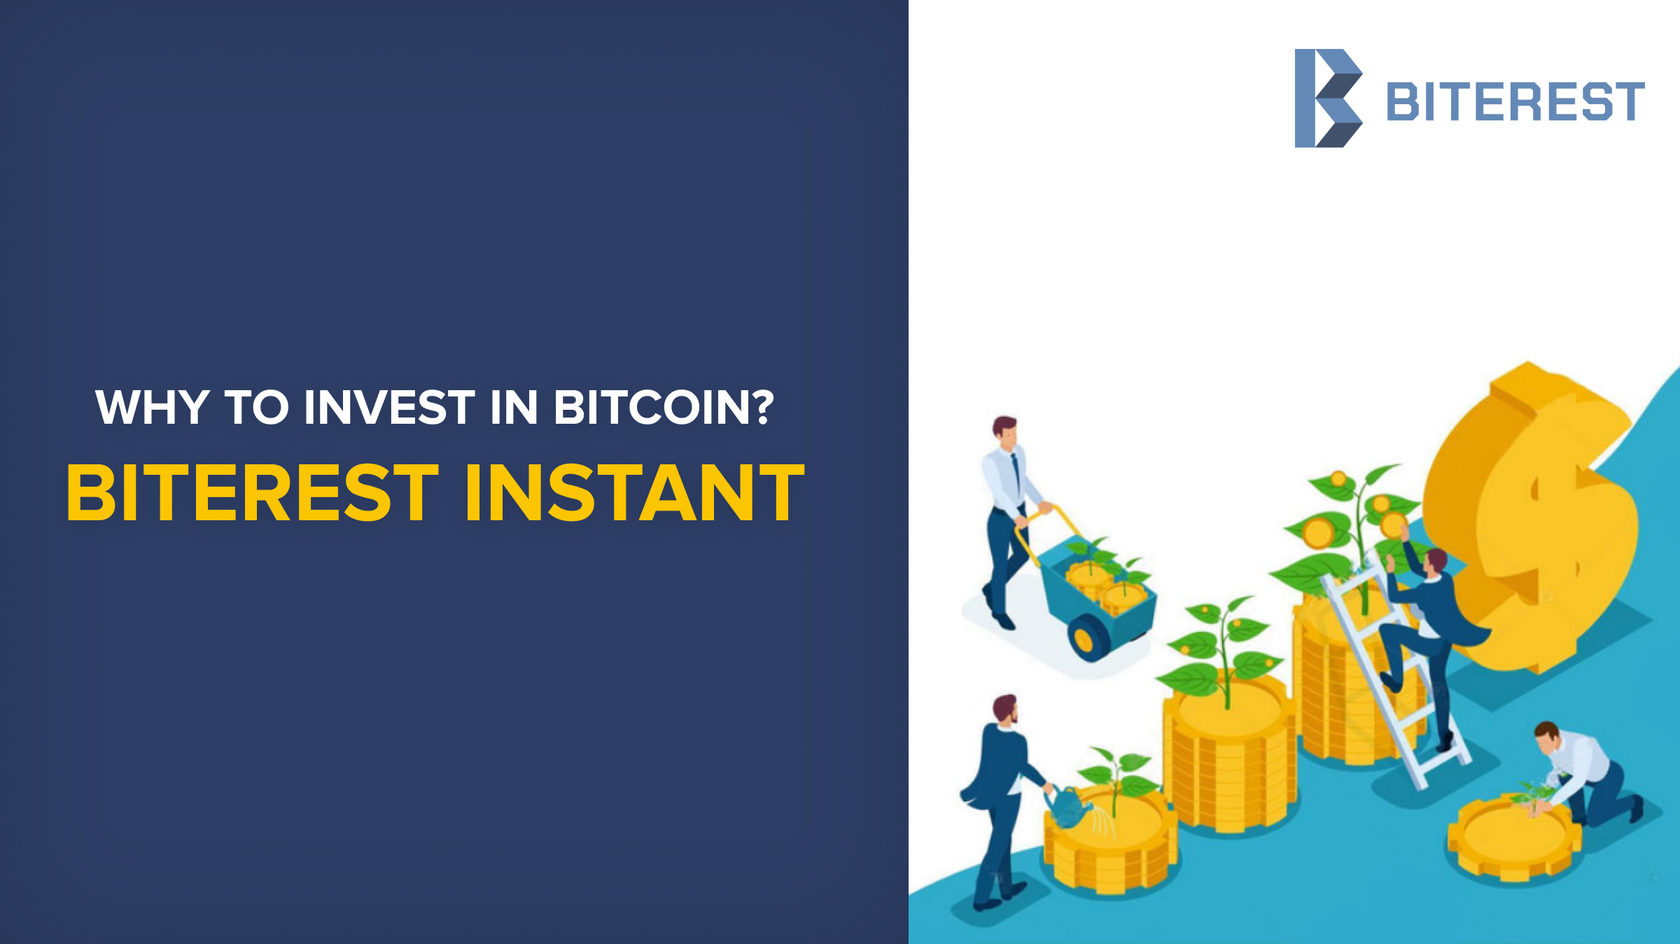 Why to invest in Bitcoin?